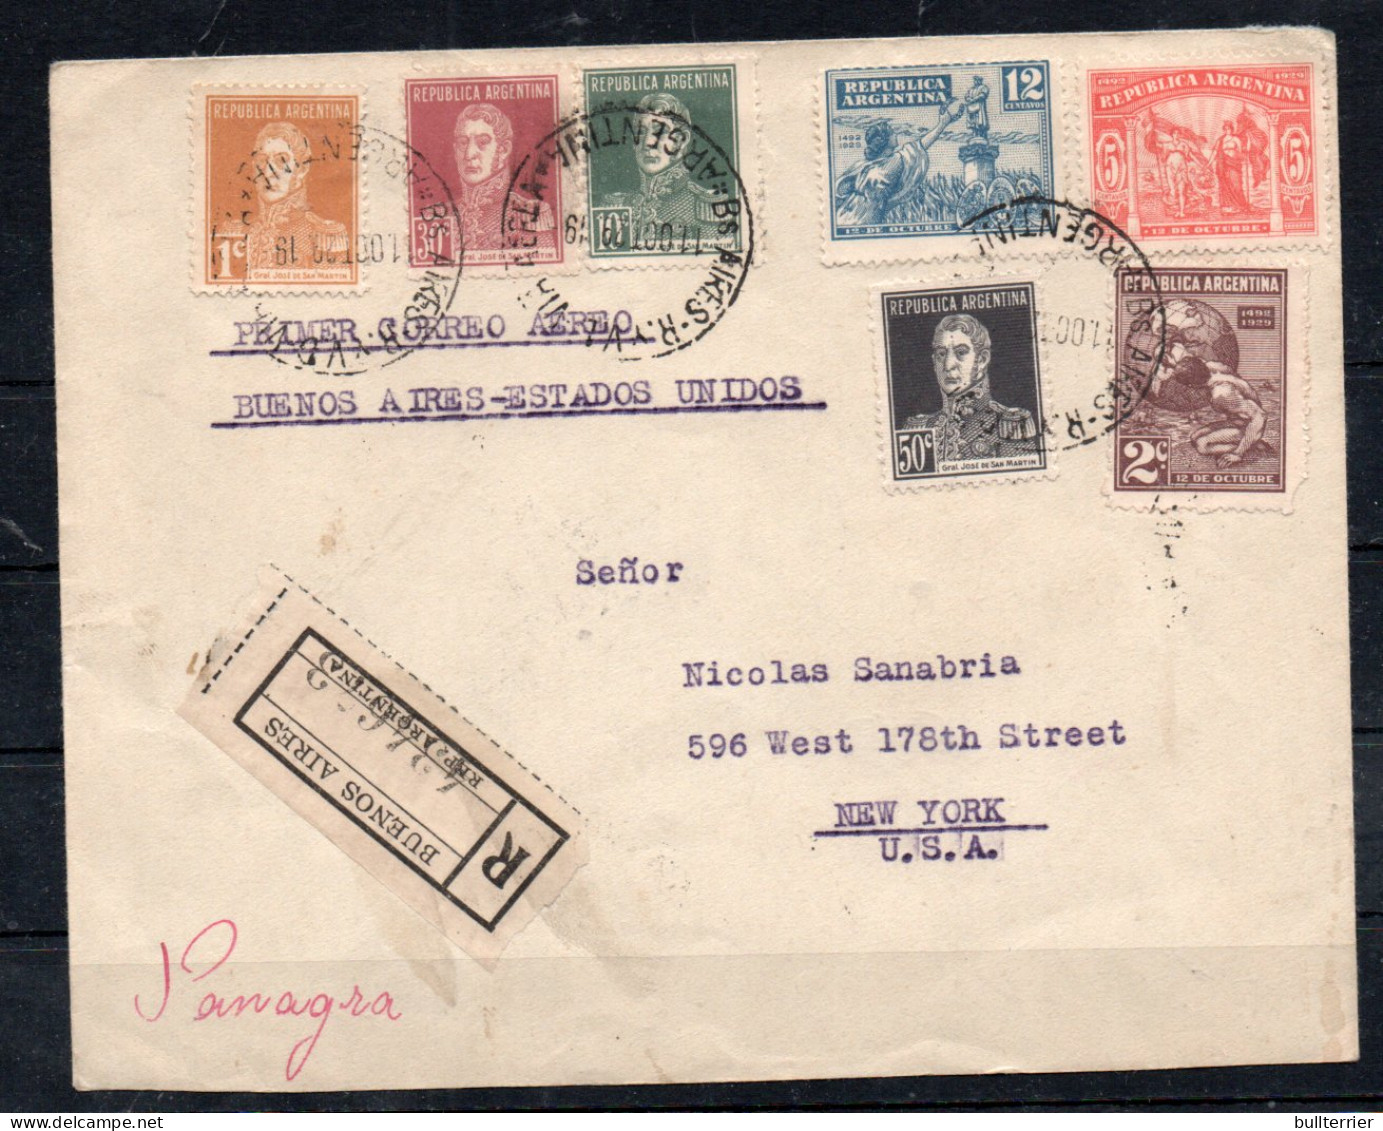 ARGENTINE - 1929  - PANAGRA REGISTERED  AIRMAIL COVER  TO NEW YORK  - Luftpost